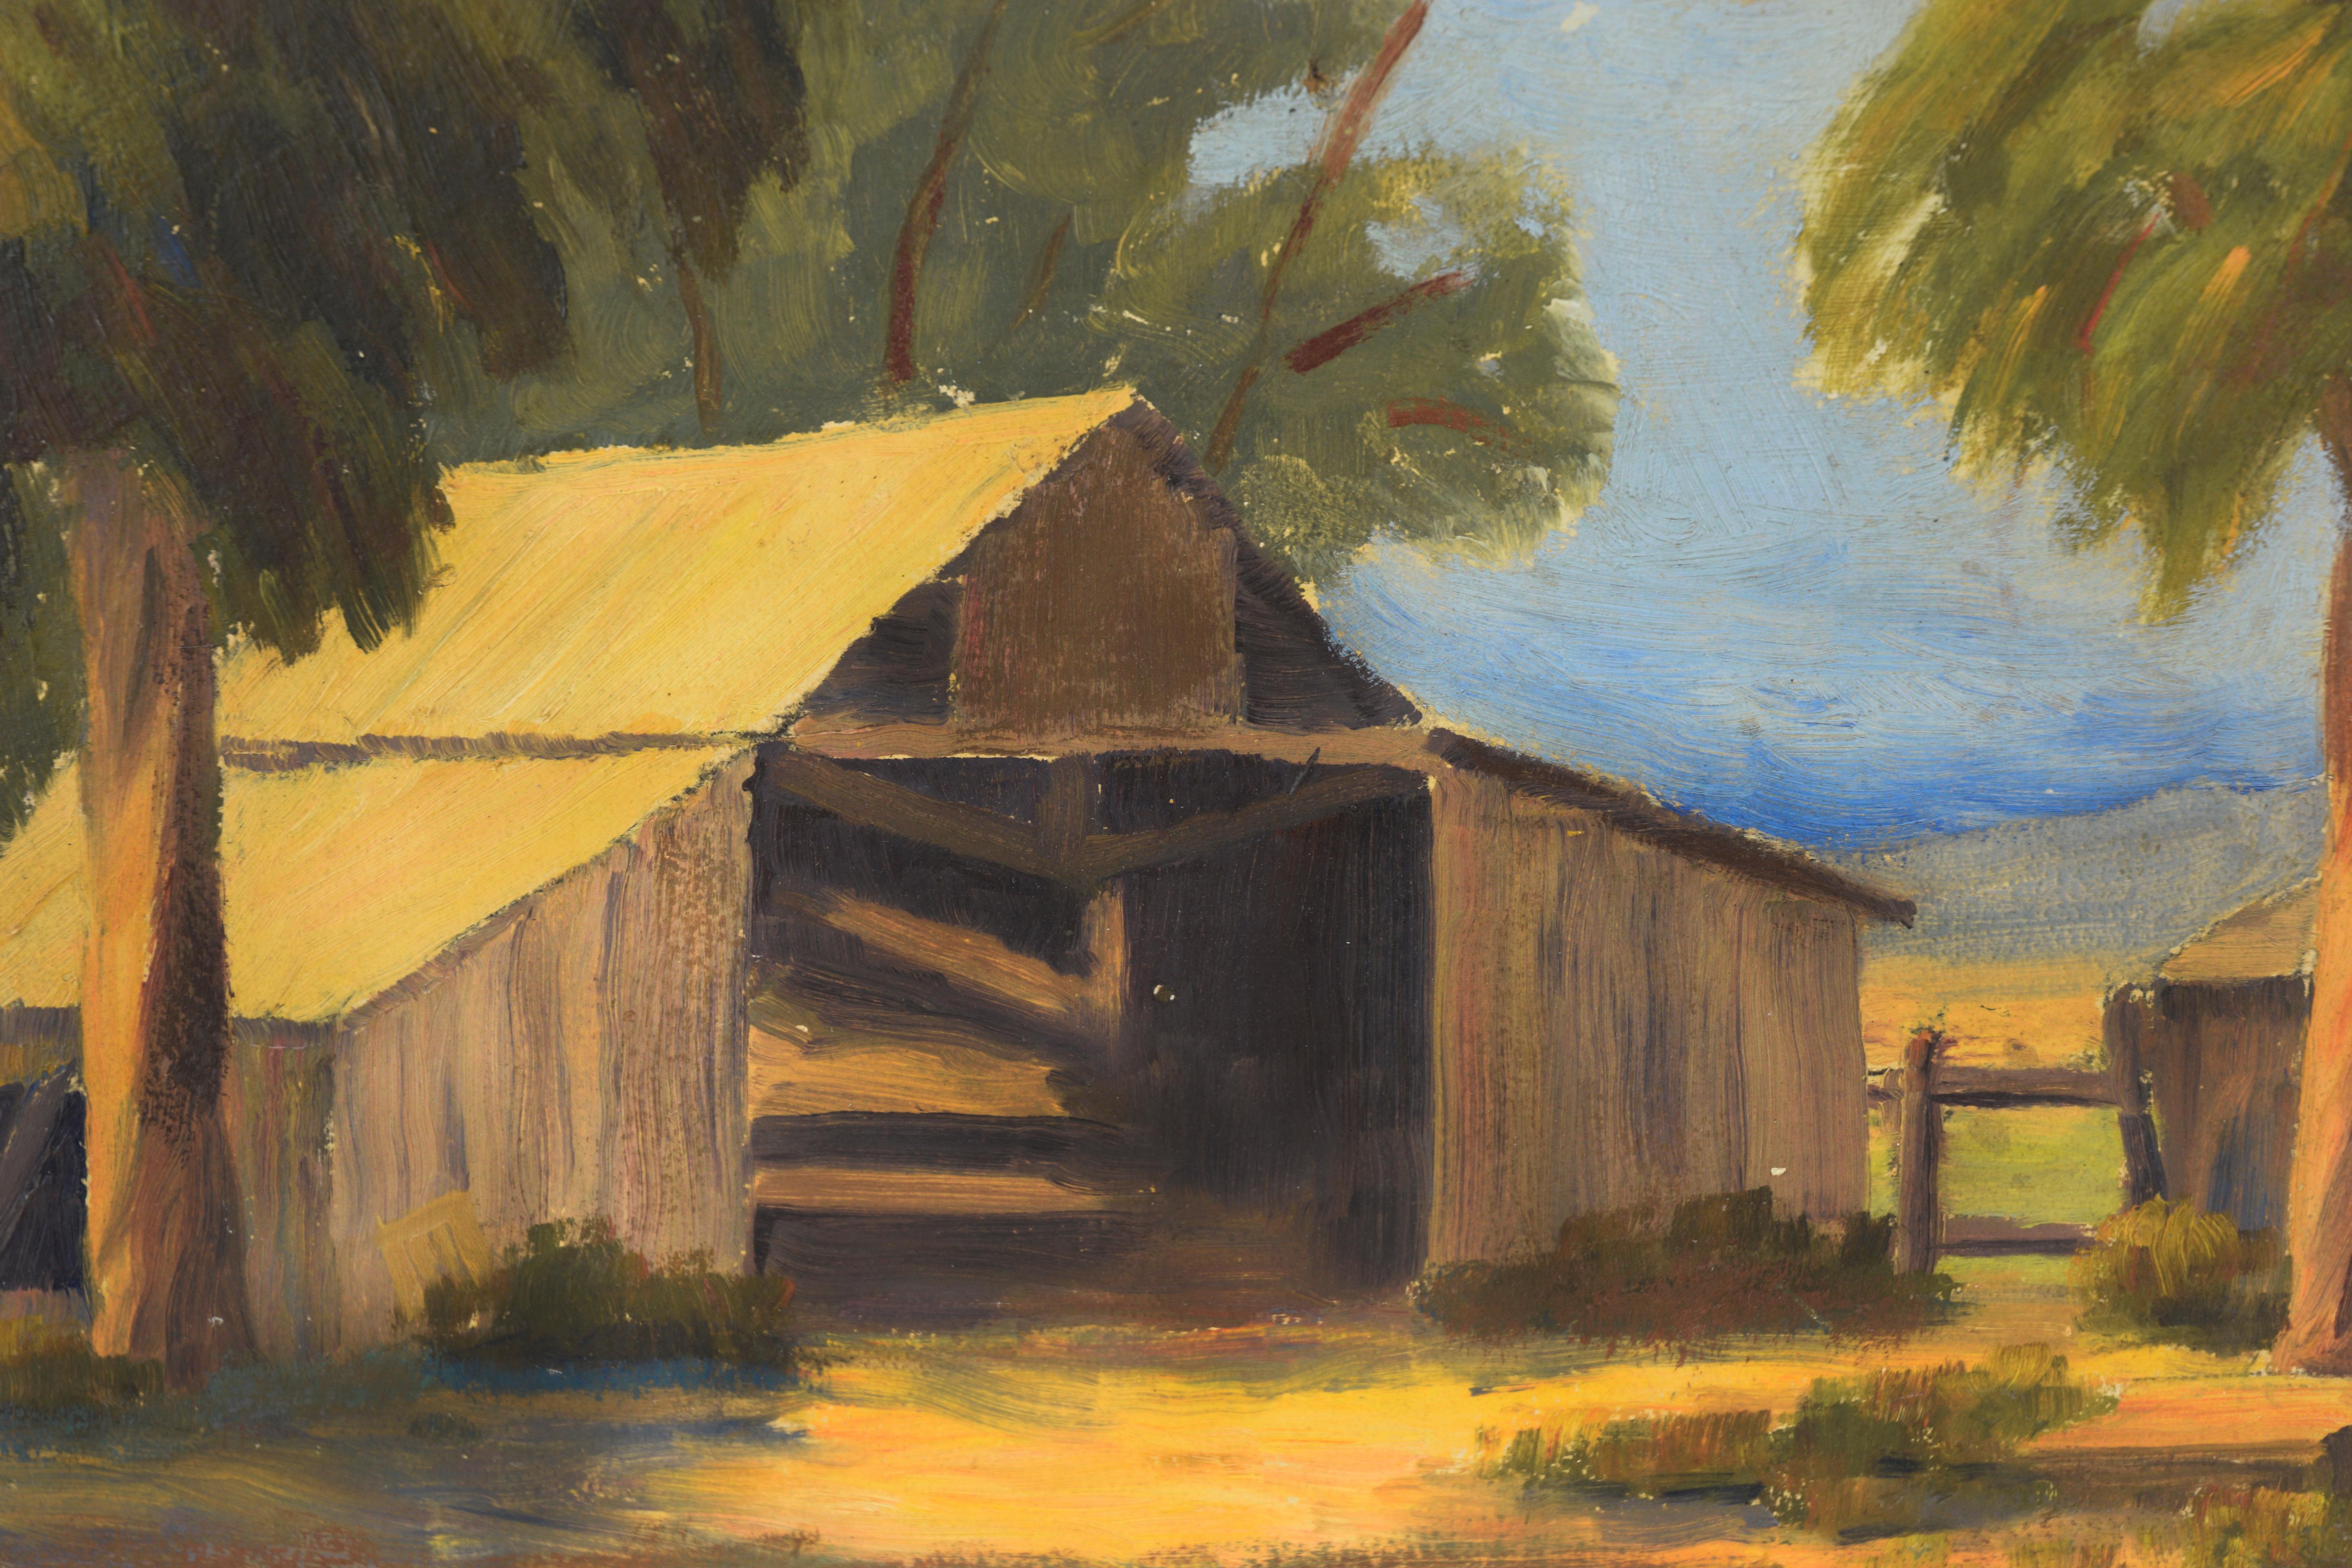 The Empty Barn - California Country Scene Oil on Canvas  - Painting by Unknown